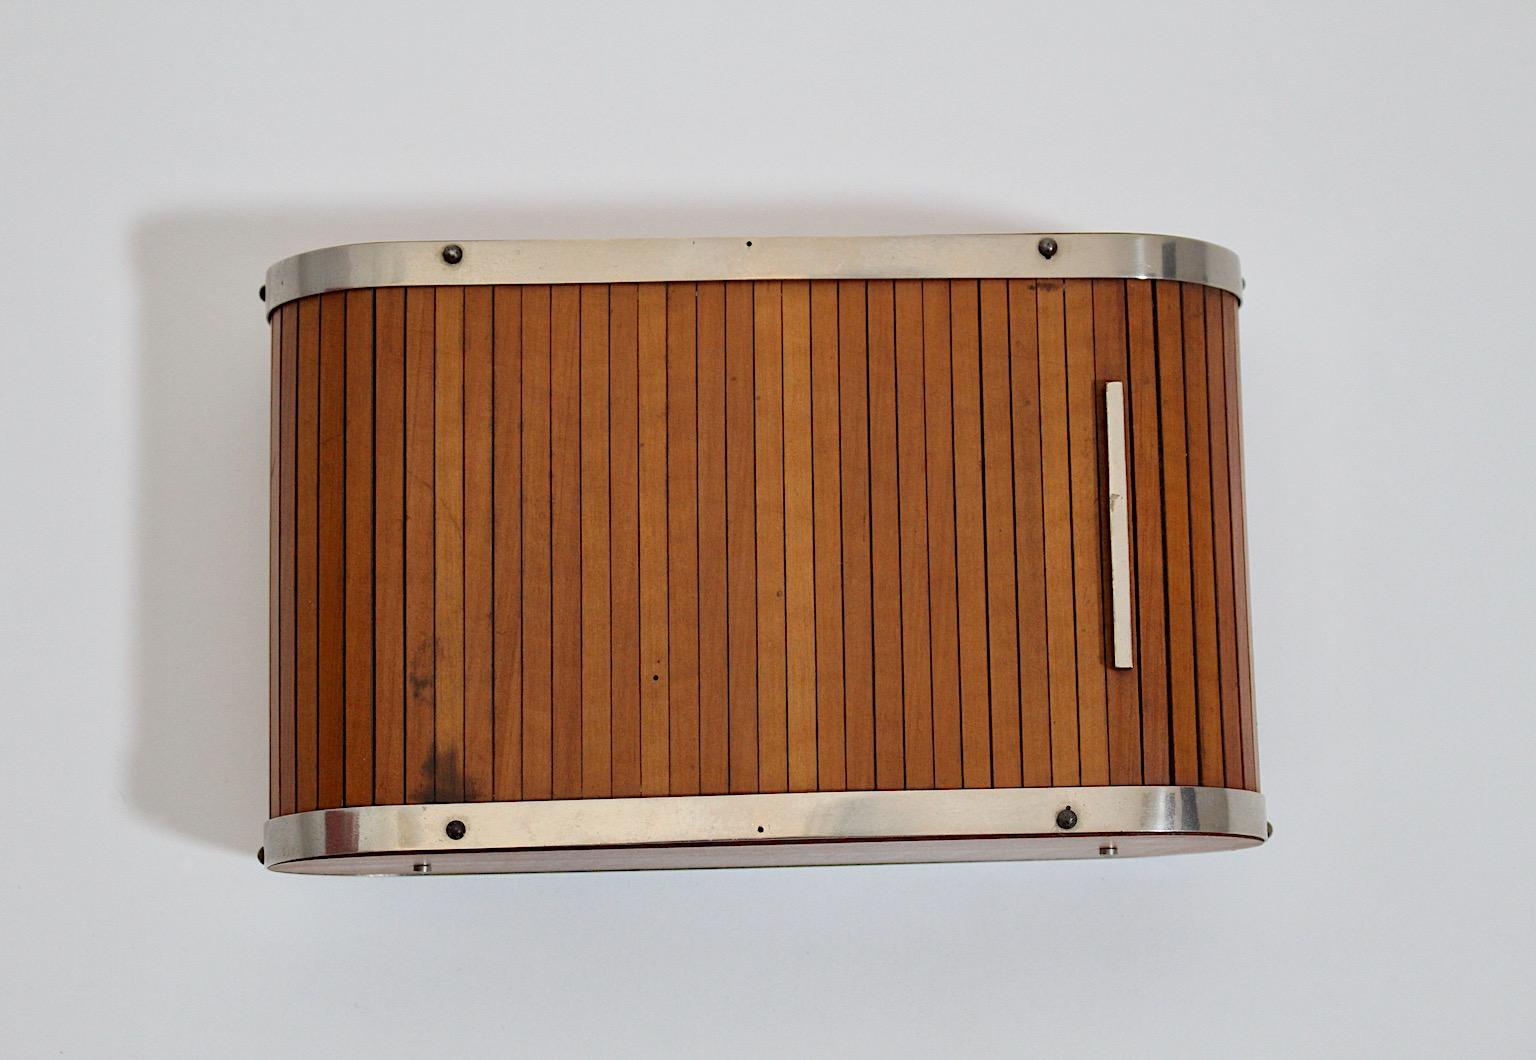 Mid-Century Modern vintage cigar box or table container for utensil from maple and nickel plated brass by Carl Auböck 1960s Vienna.
A stunning table container for utensils or cigar box from maple and nickel plated brass designed by Carl Auböck